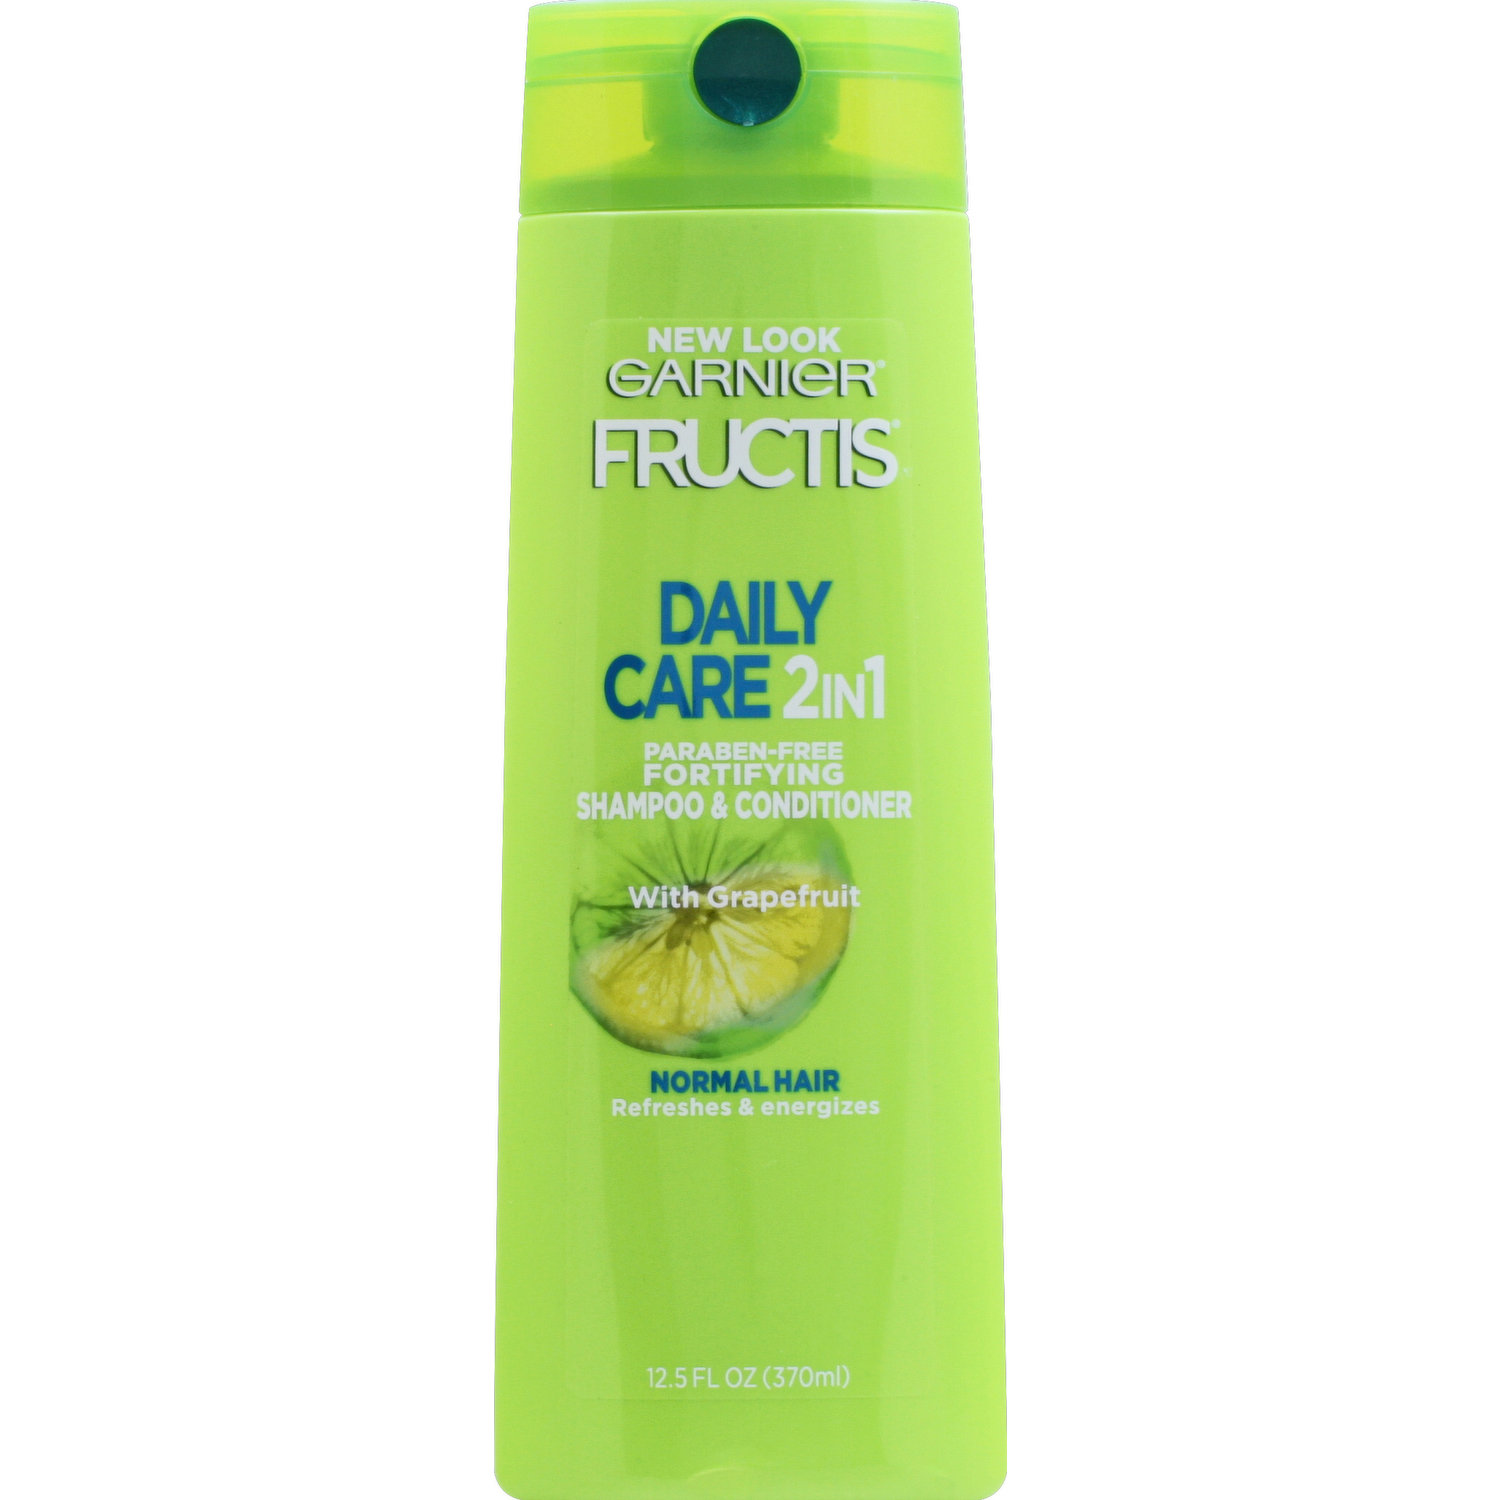 sommerfugl teori At interagere Fructis Shampoo & Conditioner, 2 in 1, Fortifying, Daily Care, Normal Hair